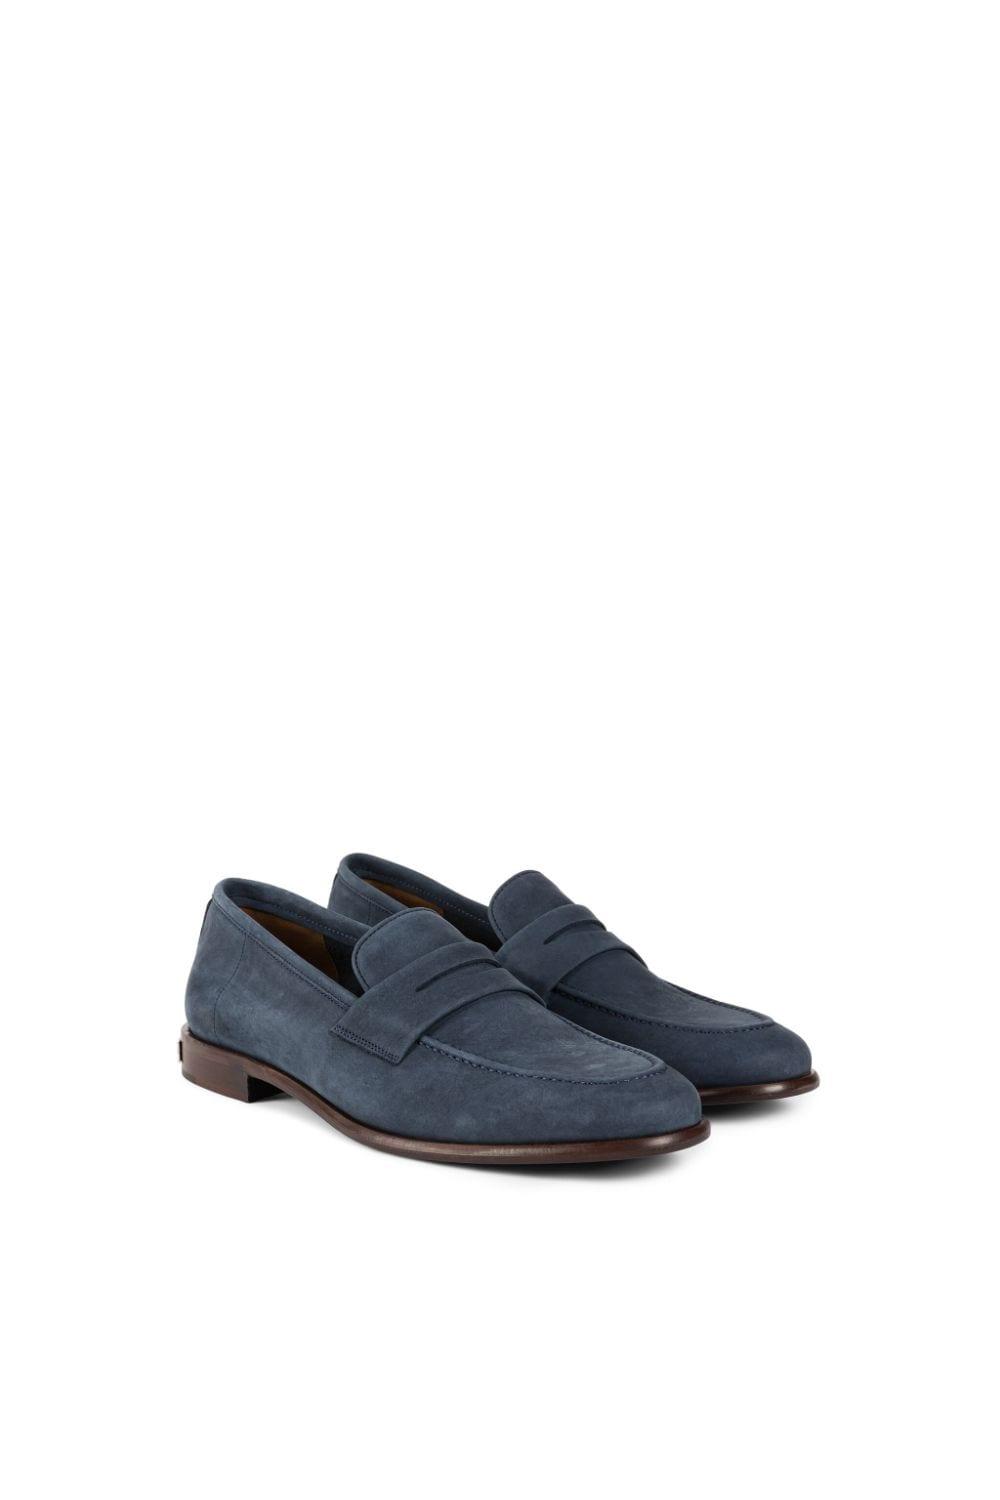 Roberto Cavalli Suede Penny Loafers in Blue for Men | Lyst